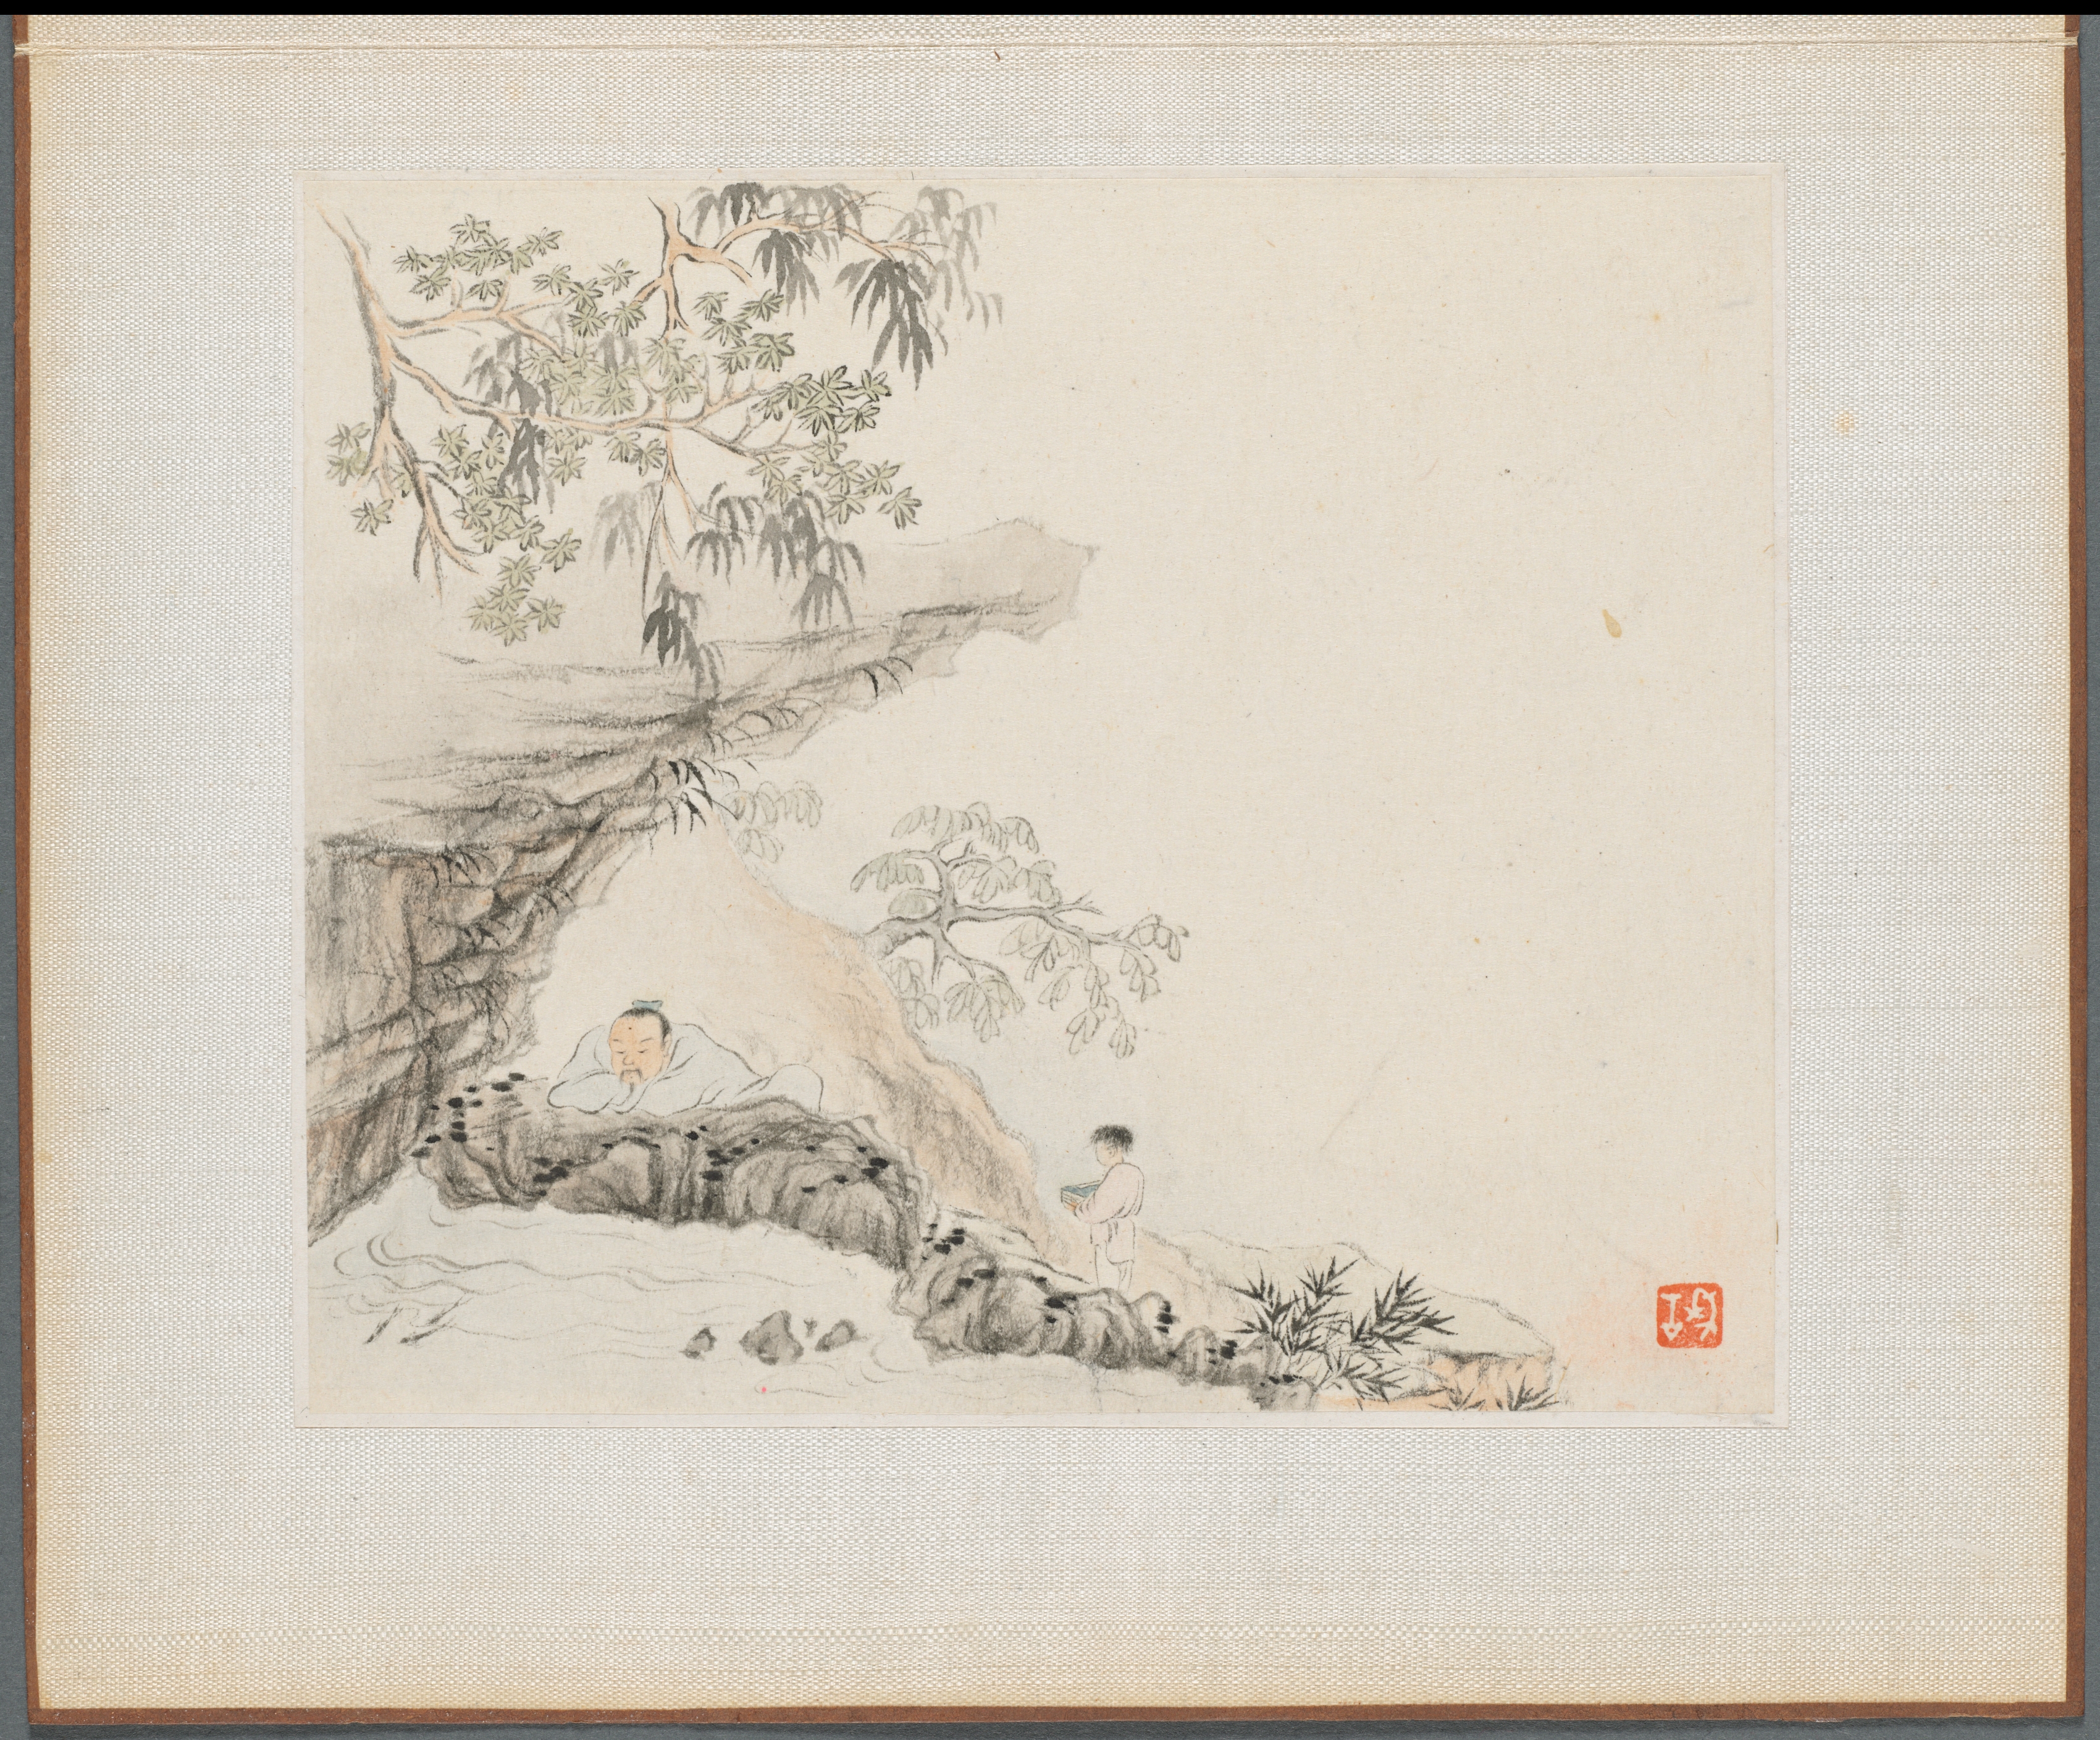 Album of Landscape Paintings Illustrating Old Poems: Scholar watching Fish